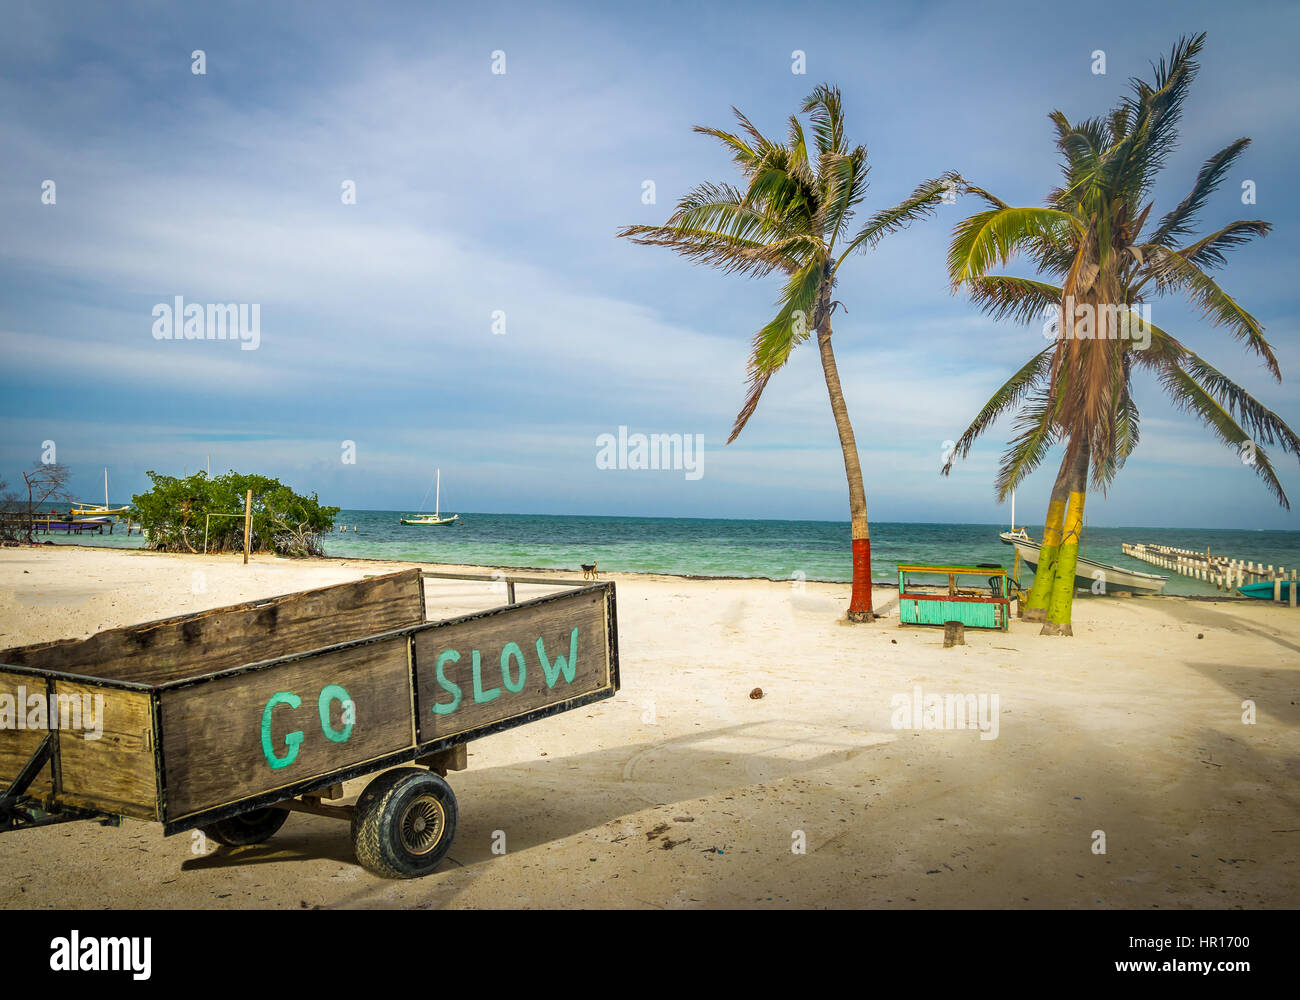 Wood Cart with Go Slow message at Caye Caulker - Belize Stock Photo